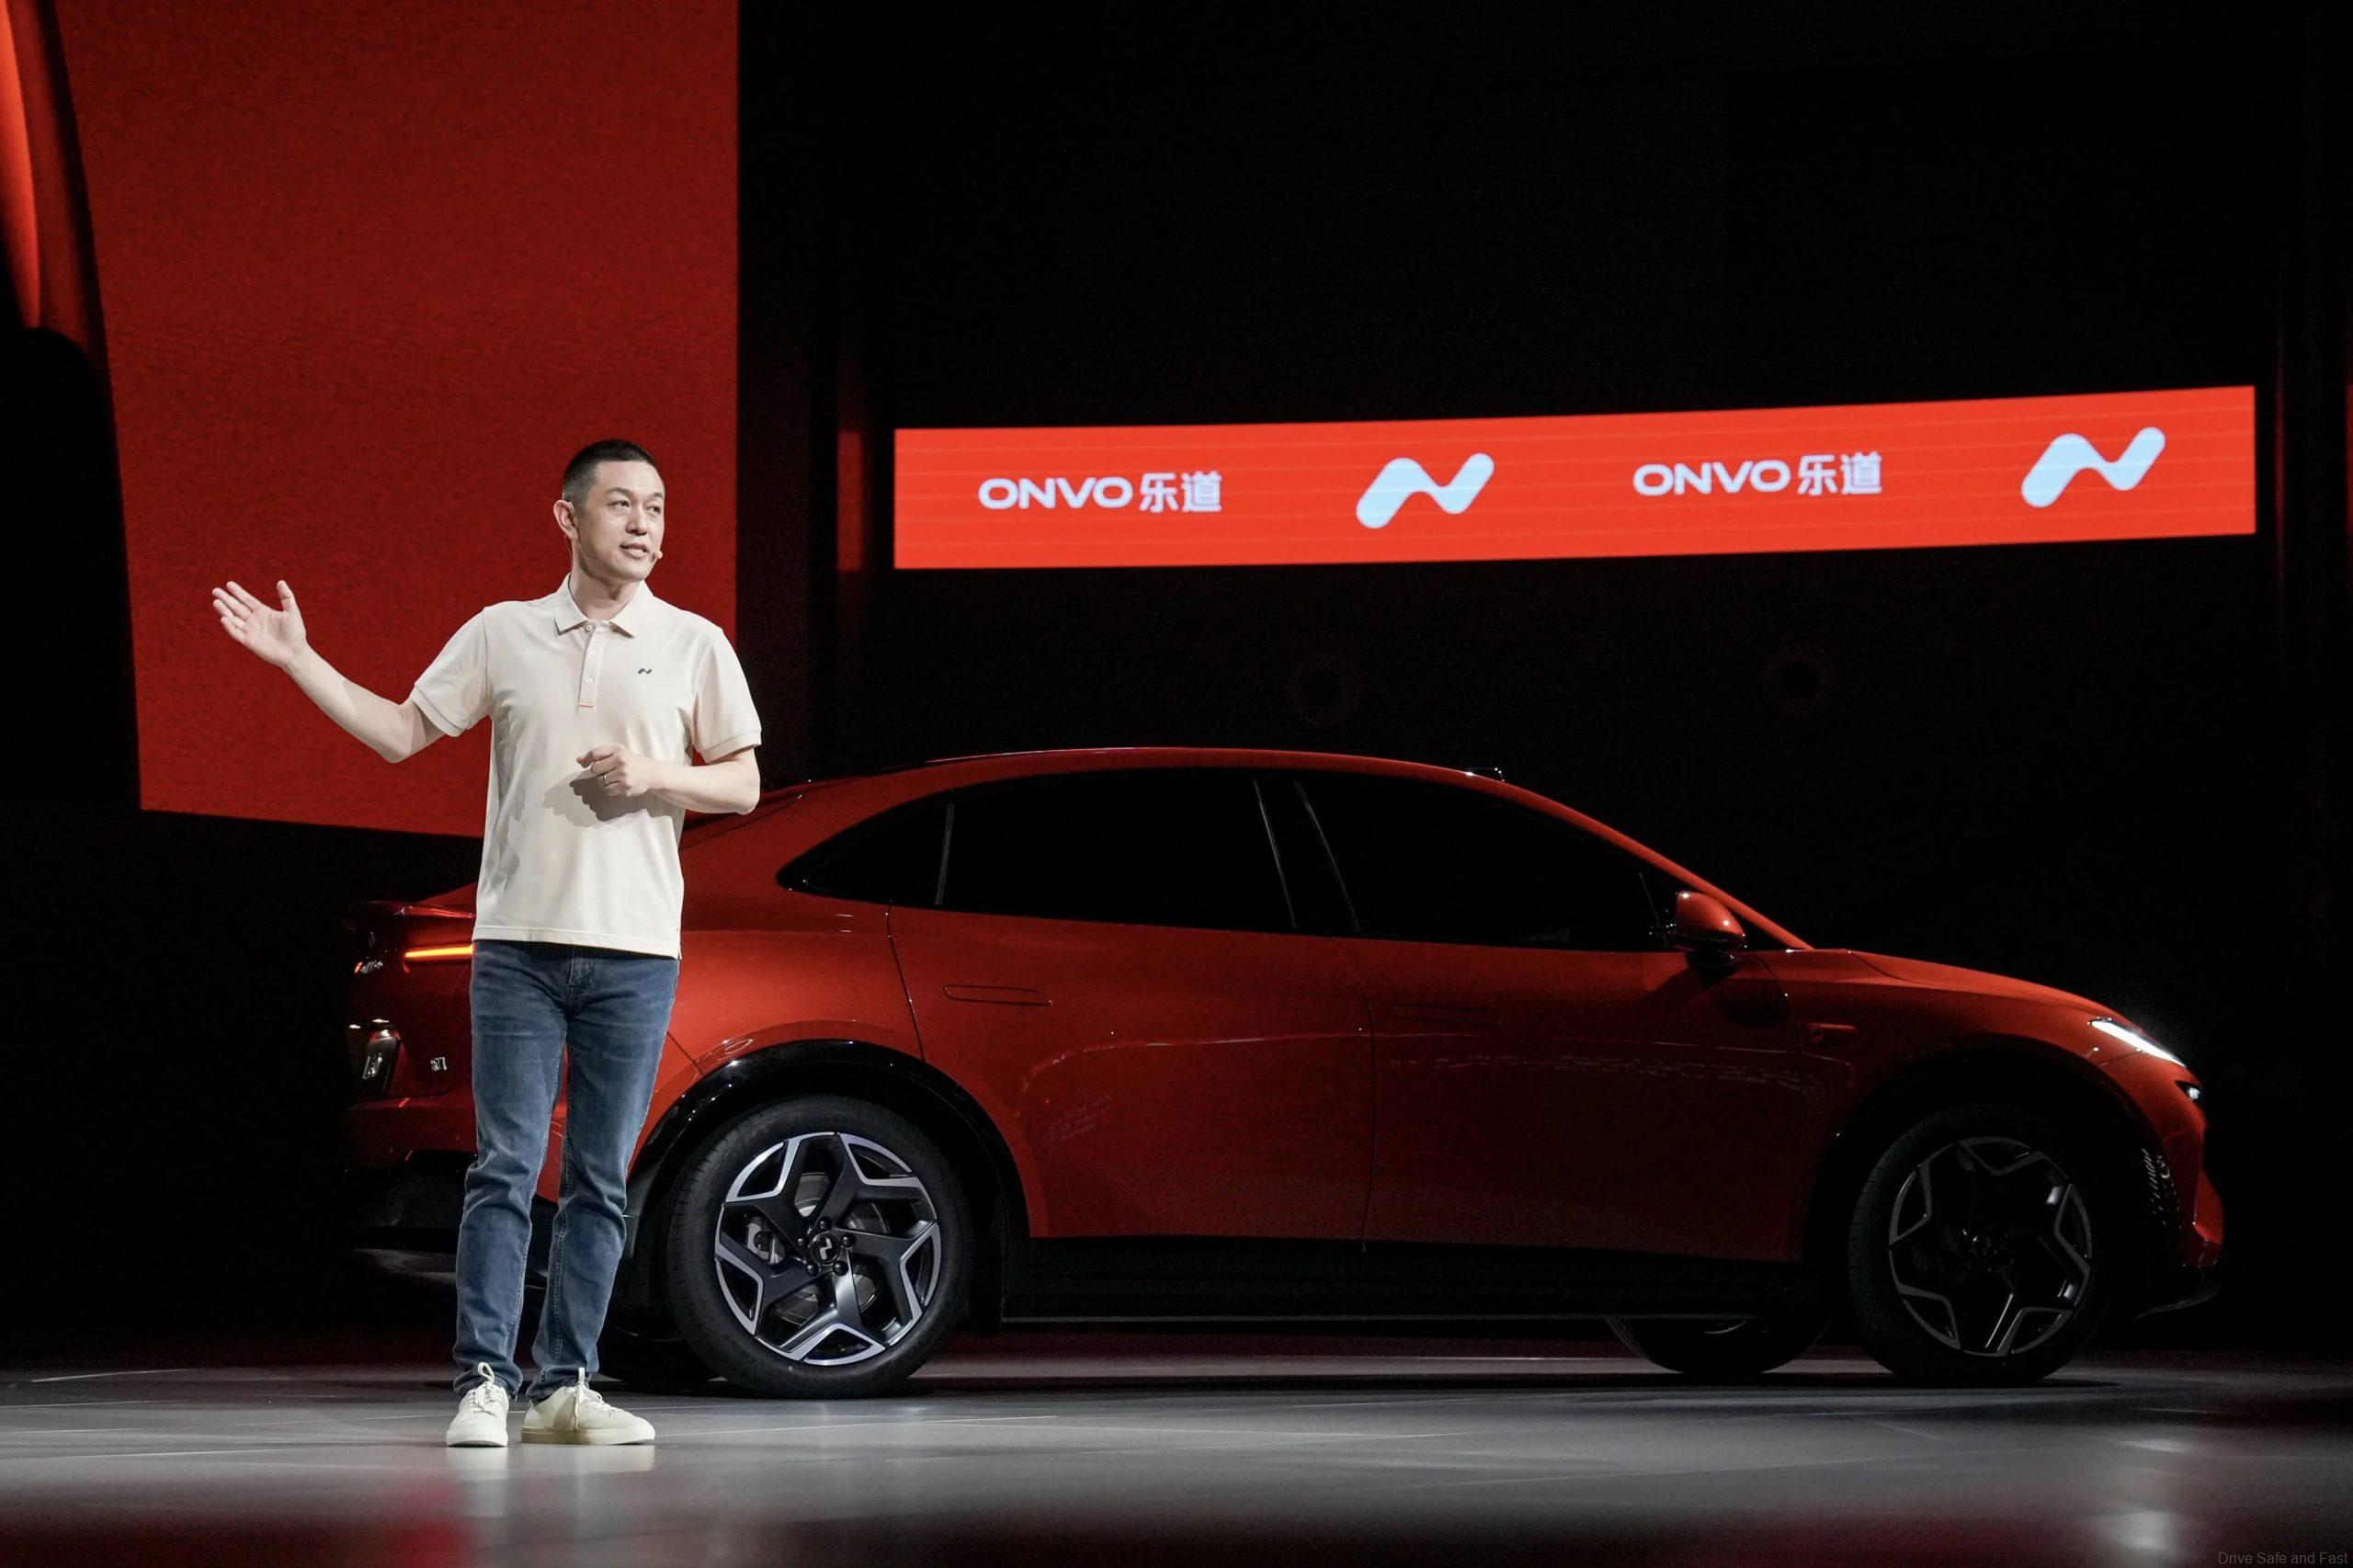 ONVO Is Yet Another Chinese Car Brand To Put On Your Radar